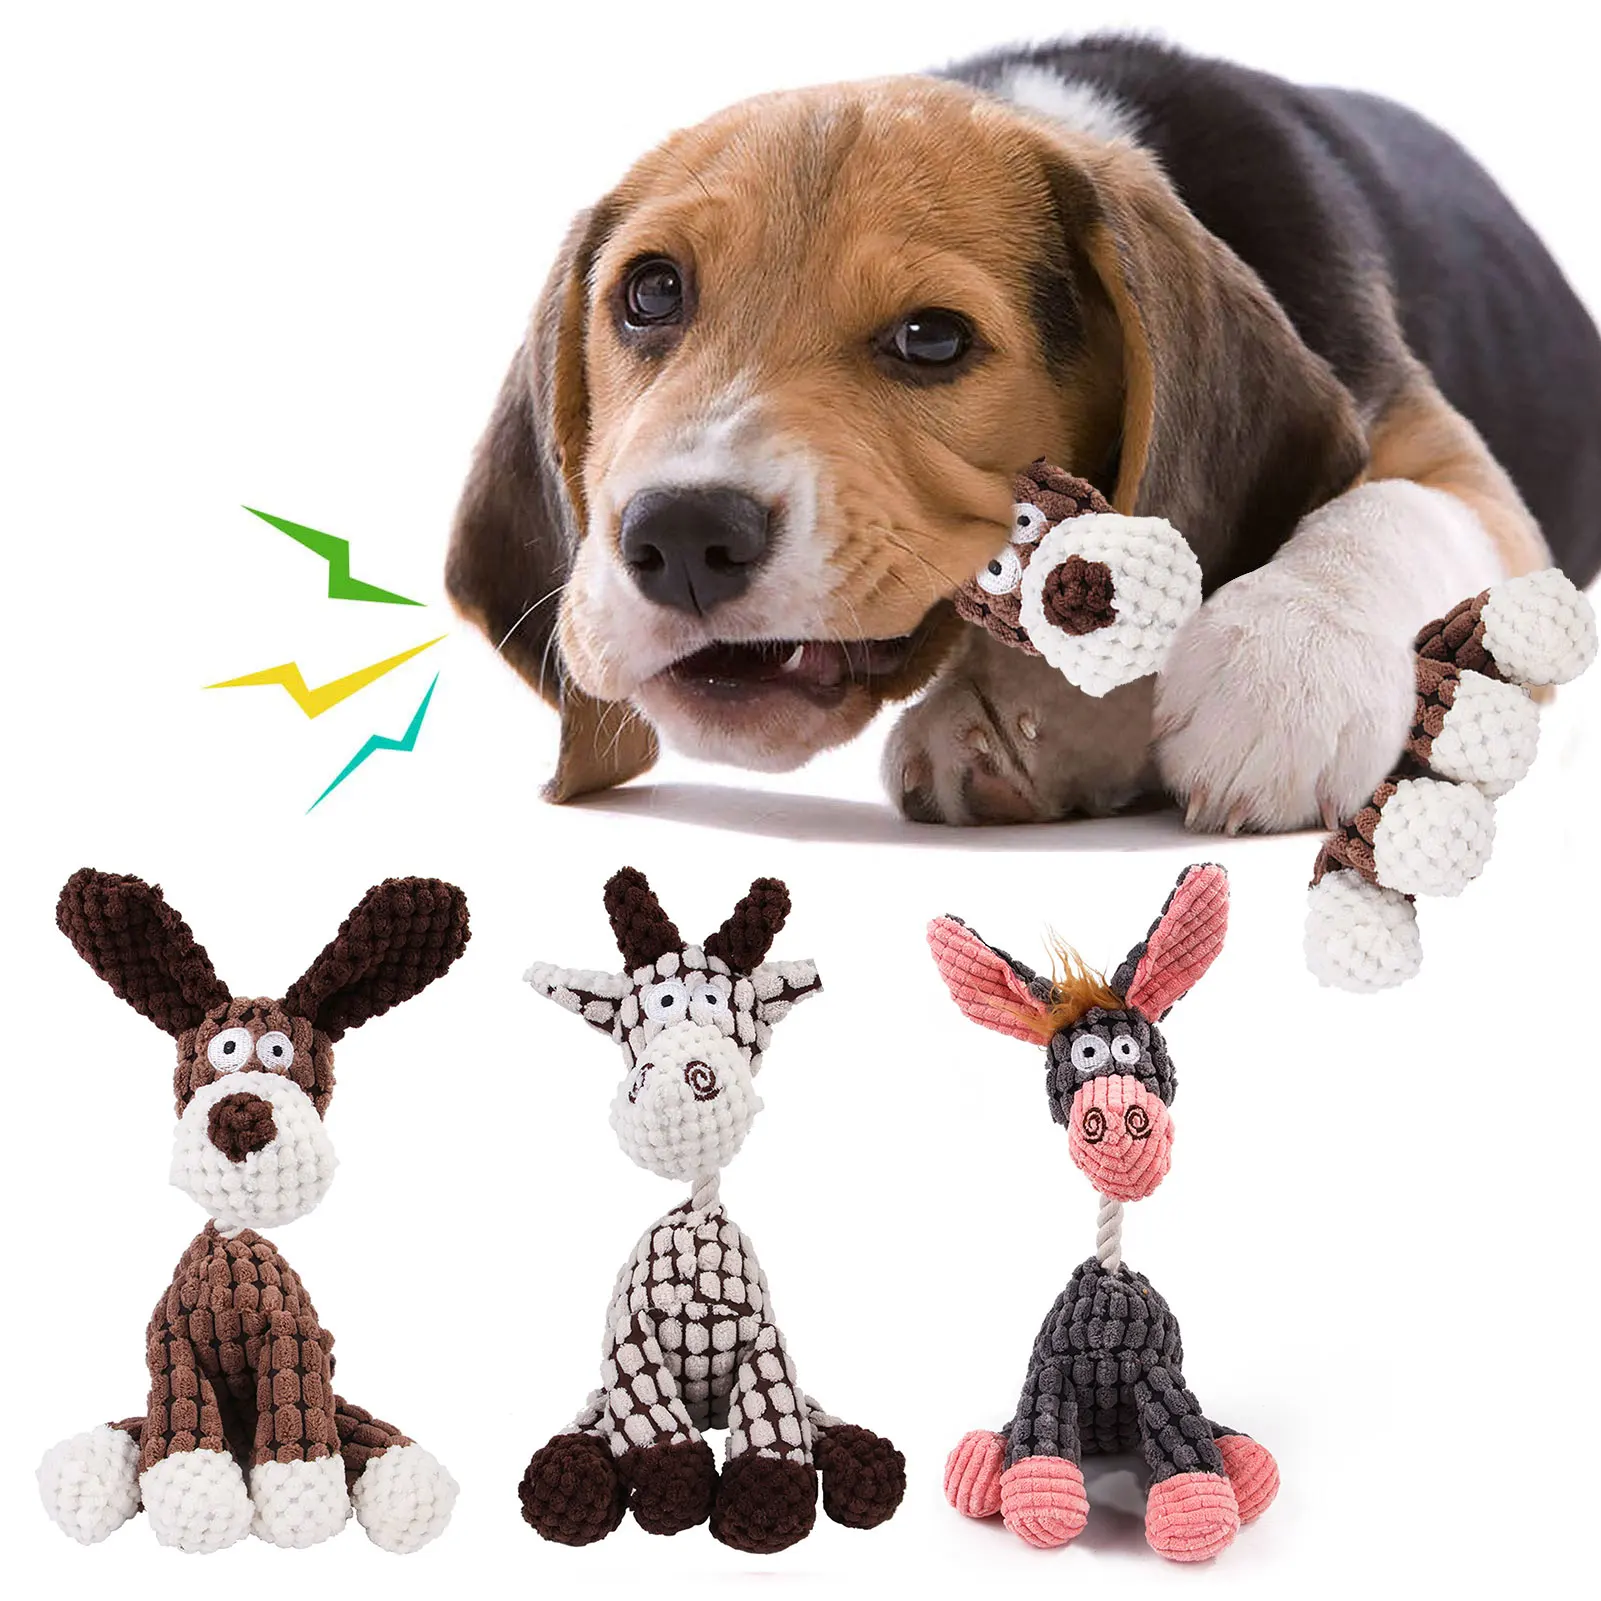 HOT Pet Chewing Animals Donkey Shaped Dog Bite Corduroy Plush Teething Toy for Small Dogs High Quality Pet Training Supplies